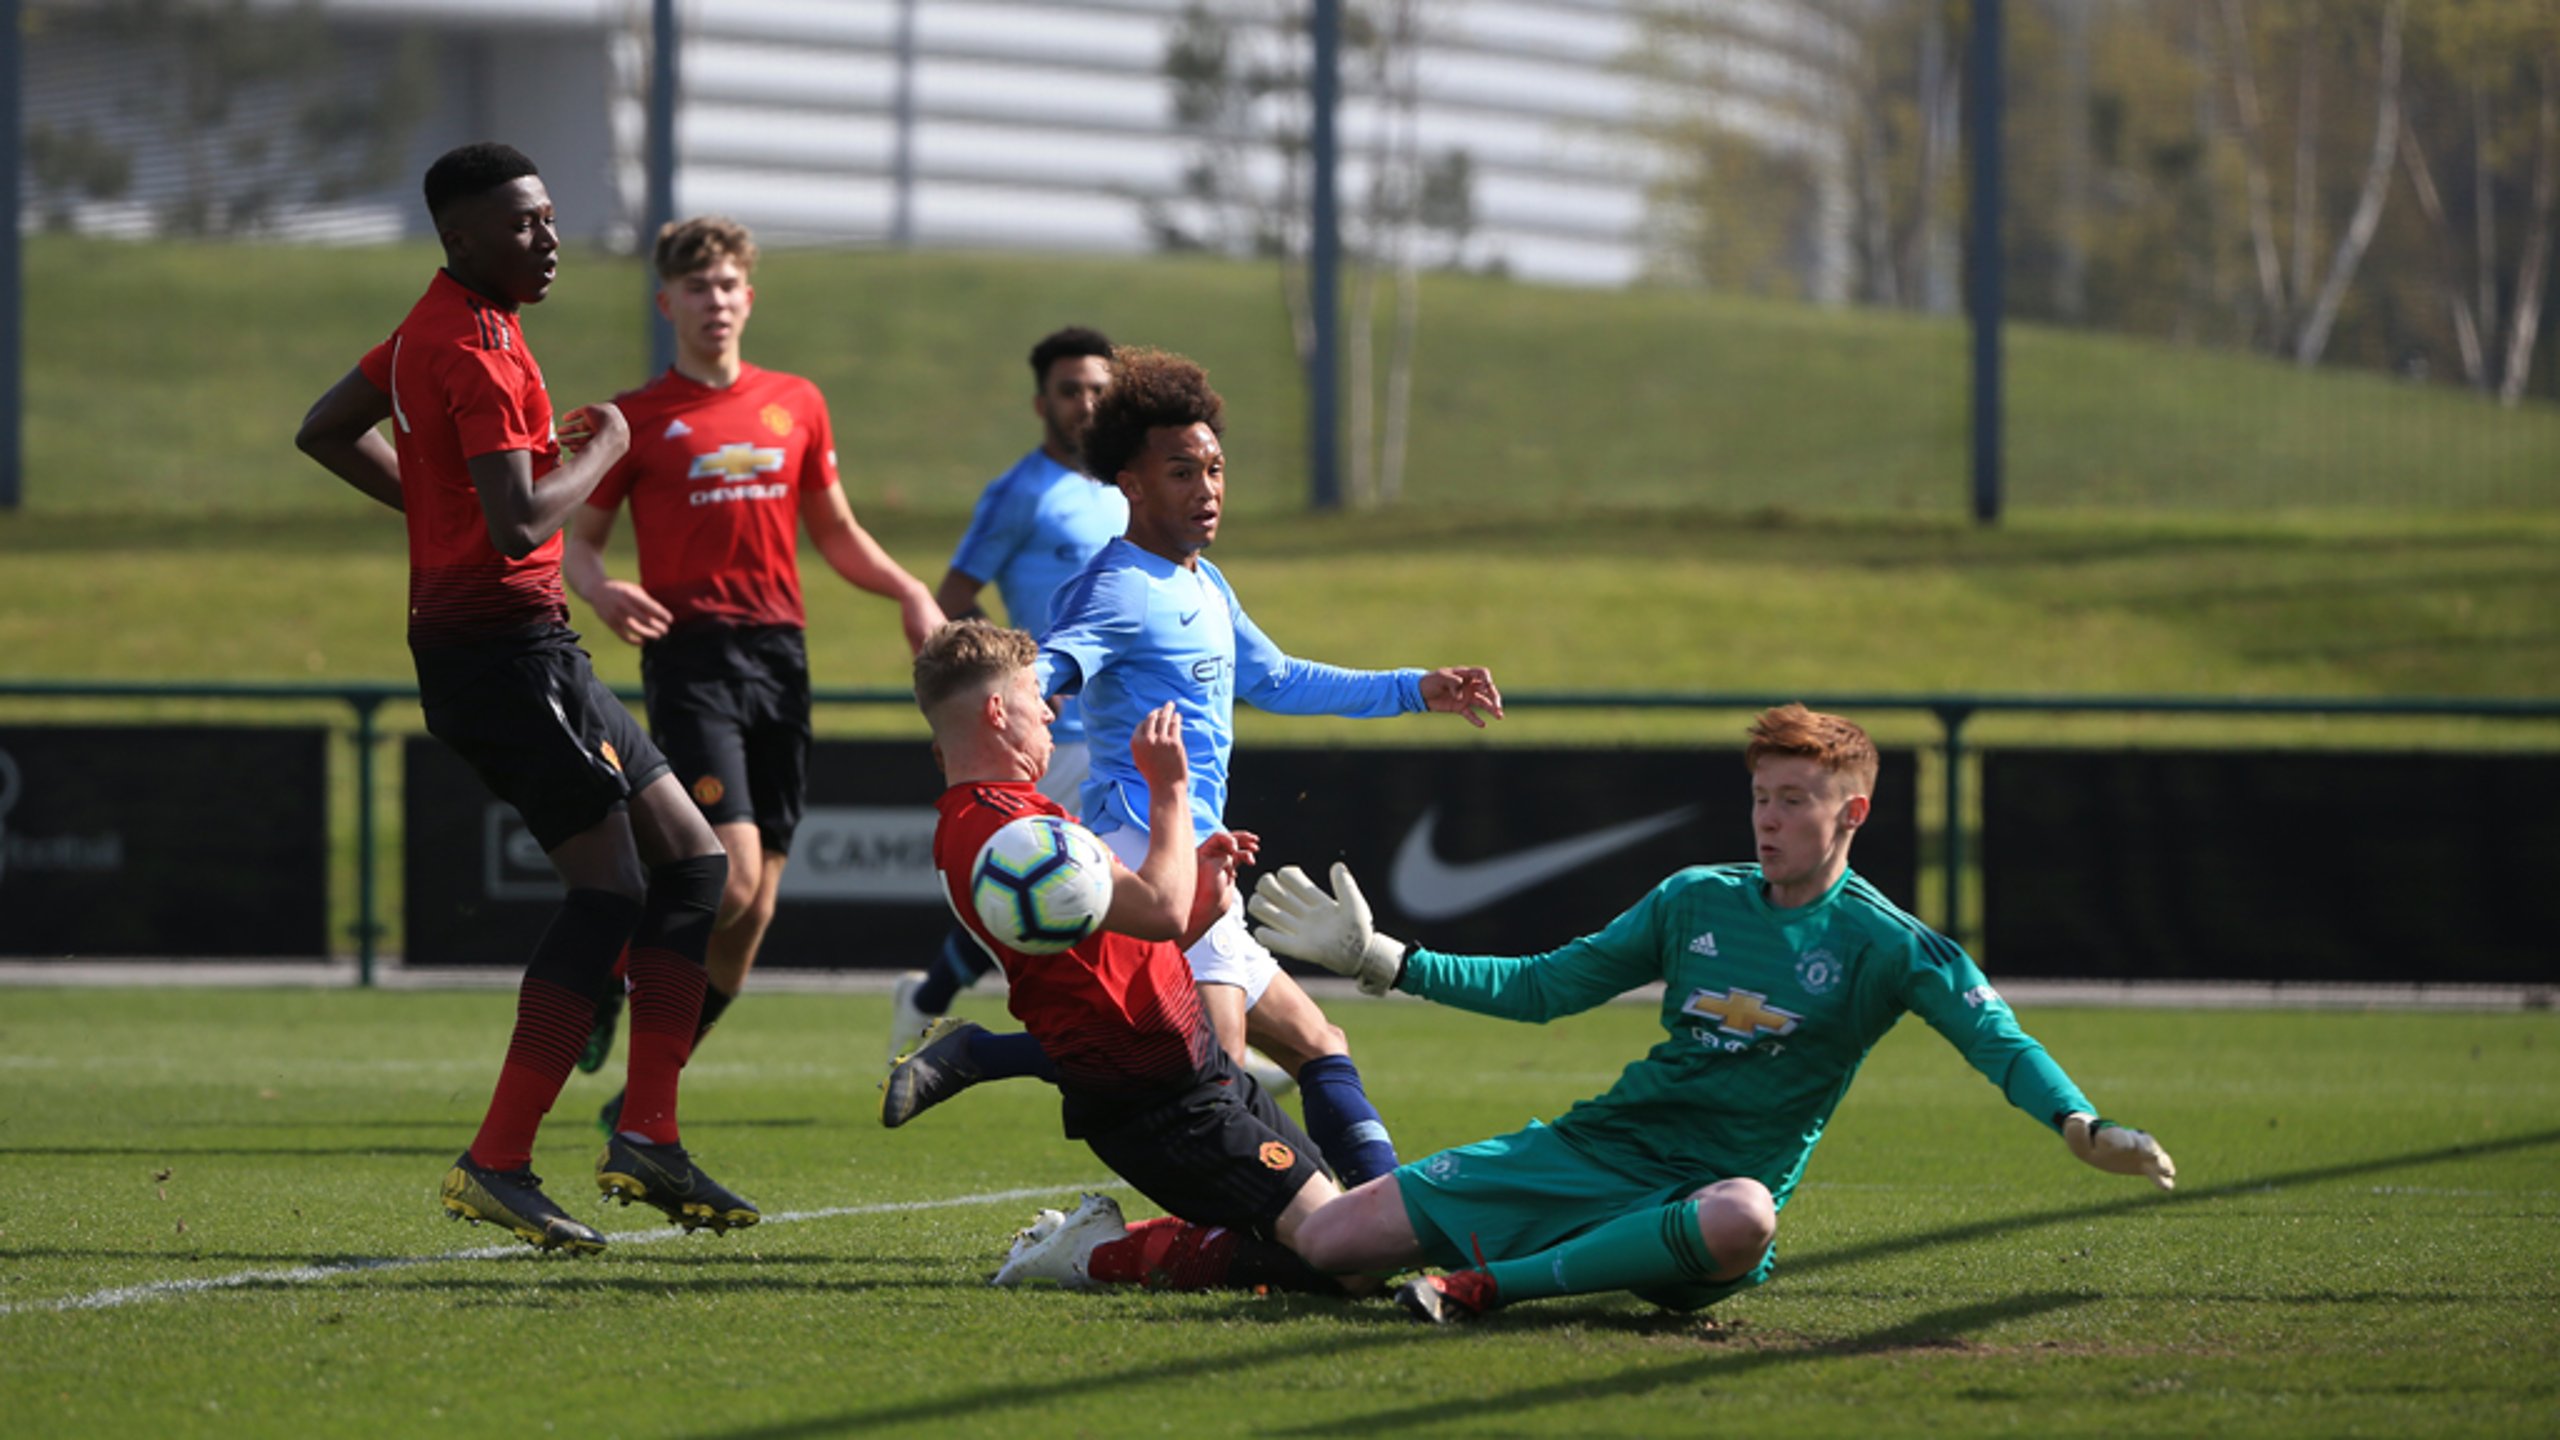 DERBY DAY: City faced their local rivals in the U18 Premier League